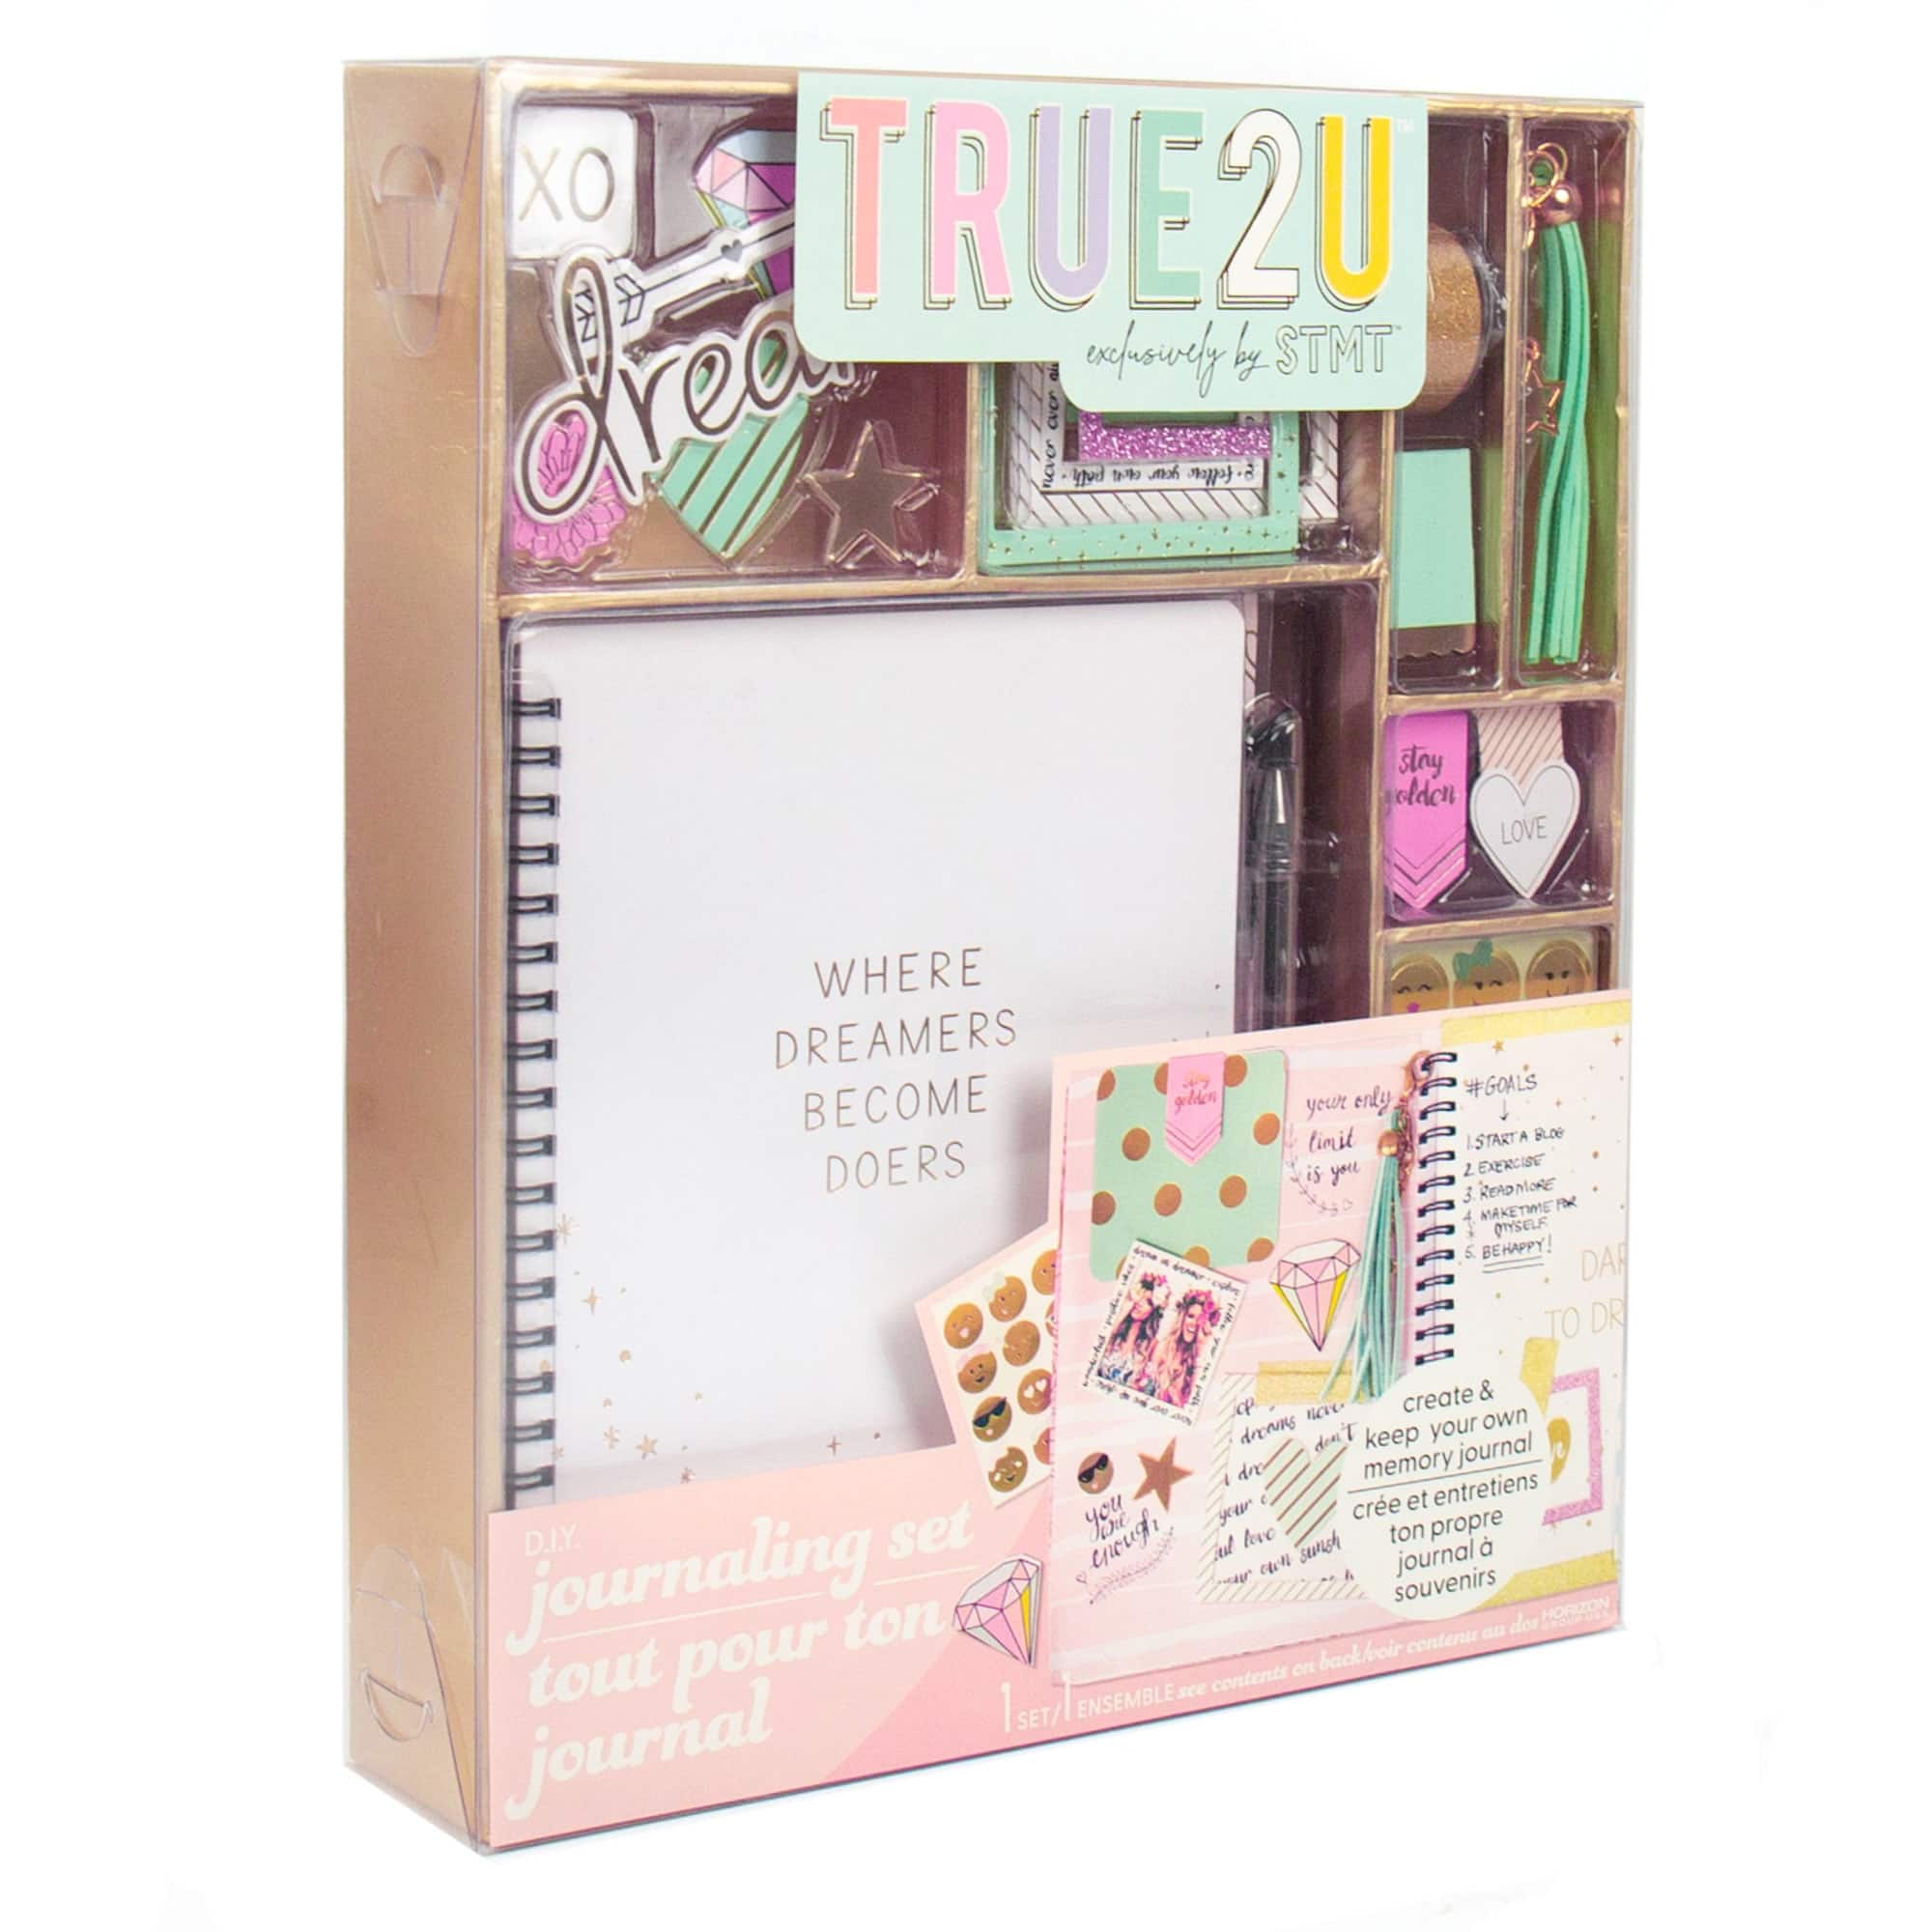 New STMT DIY Journaling Set by Horizon Group Create Keep Your Own Memory  Journal